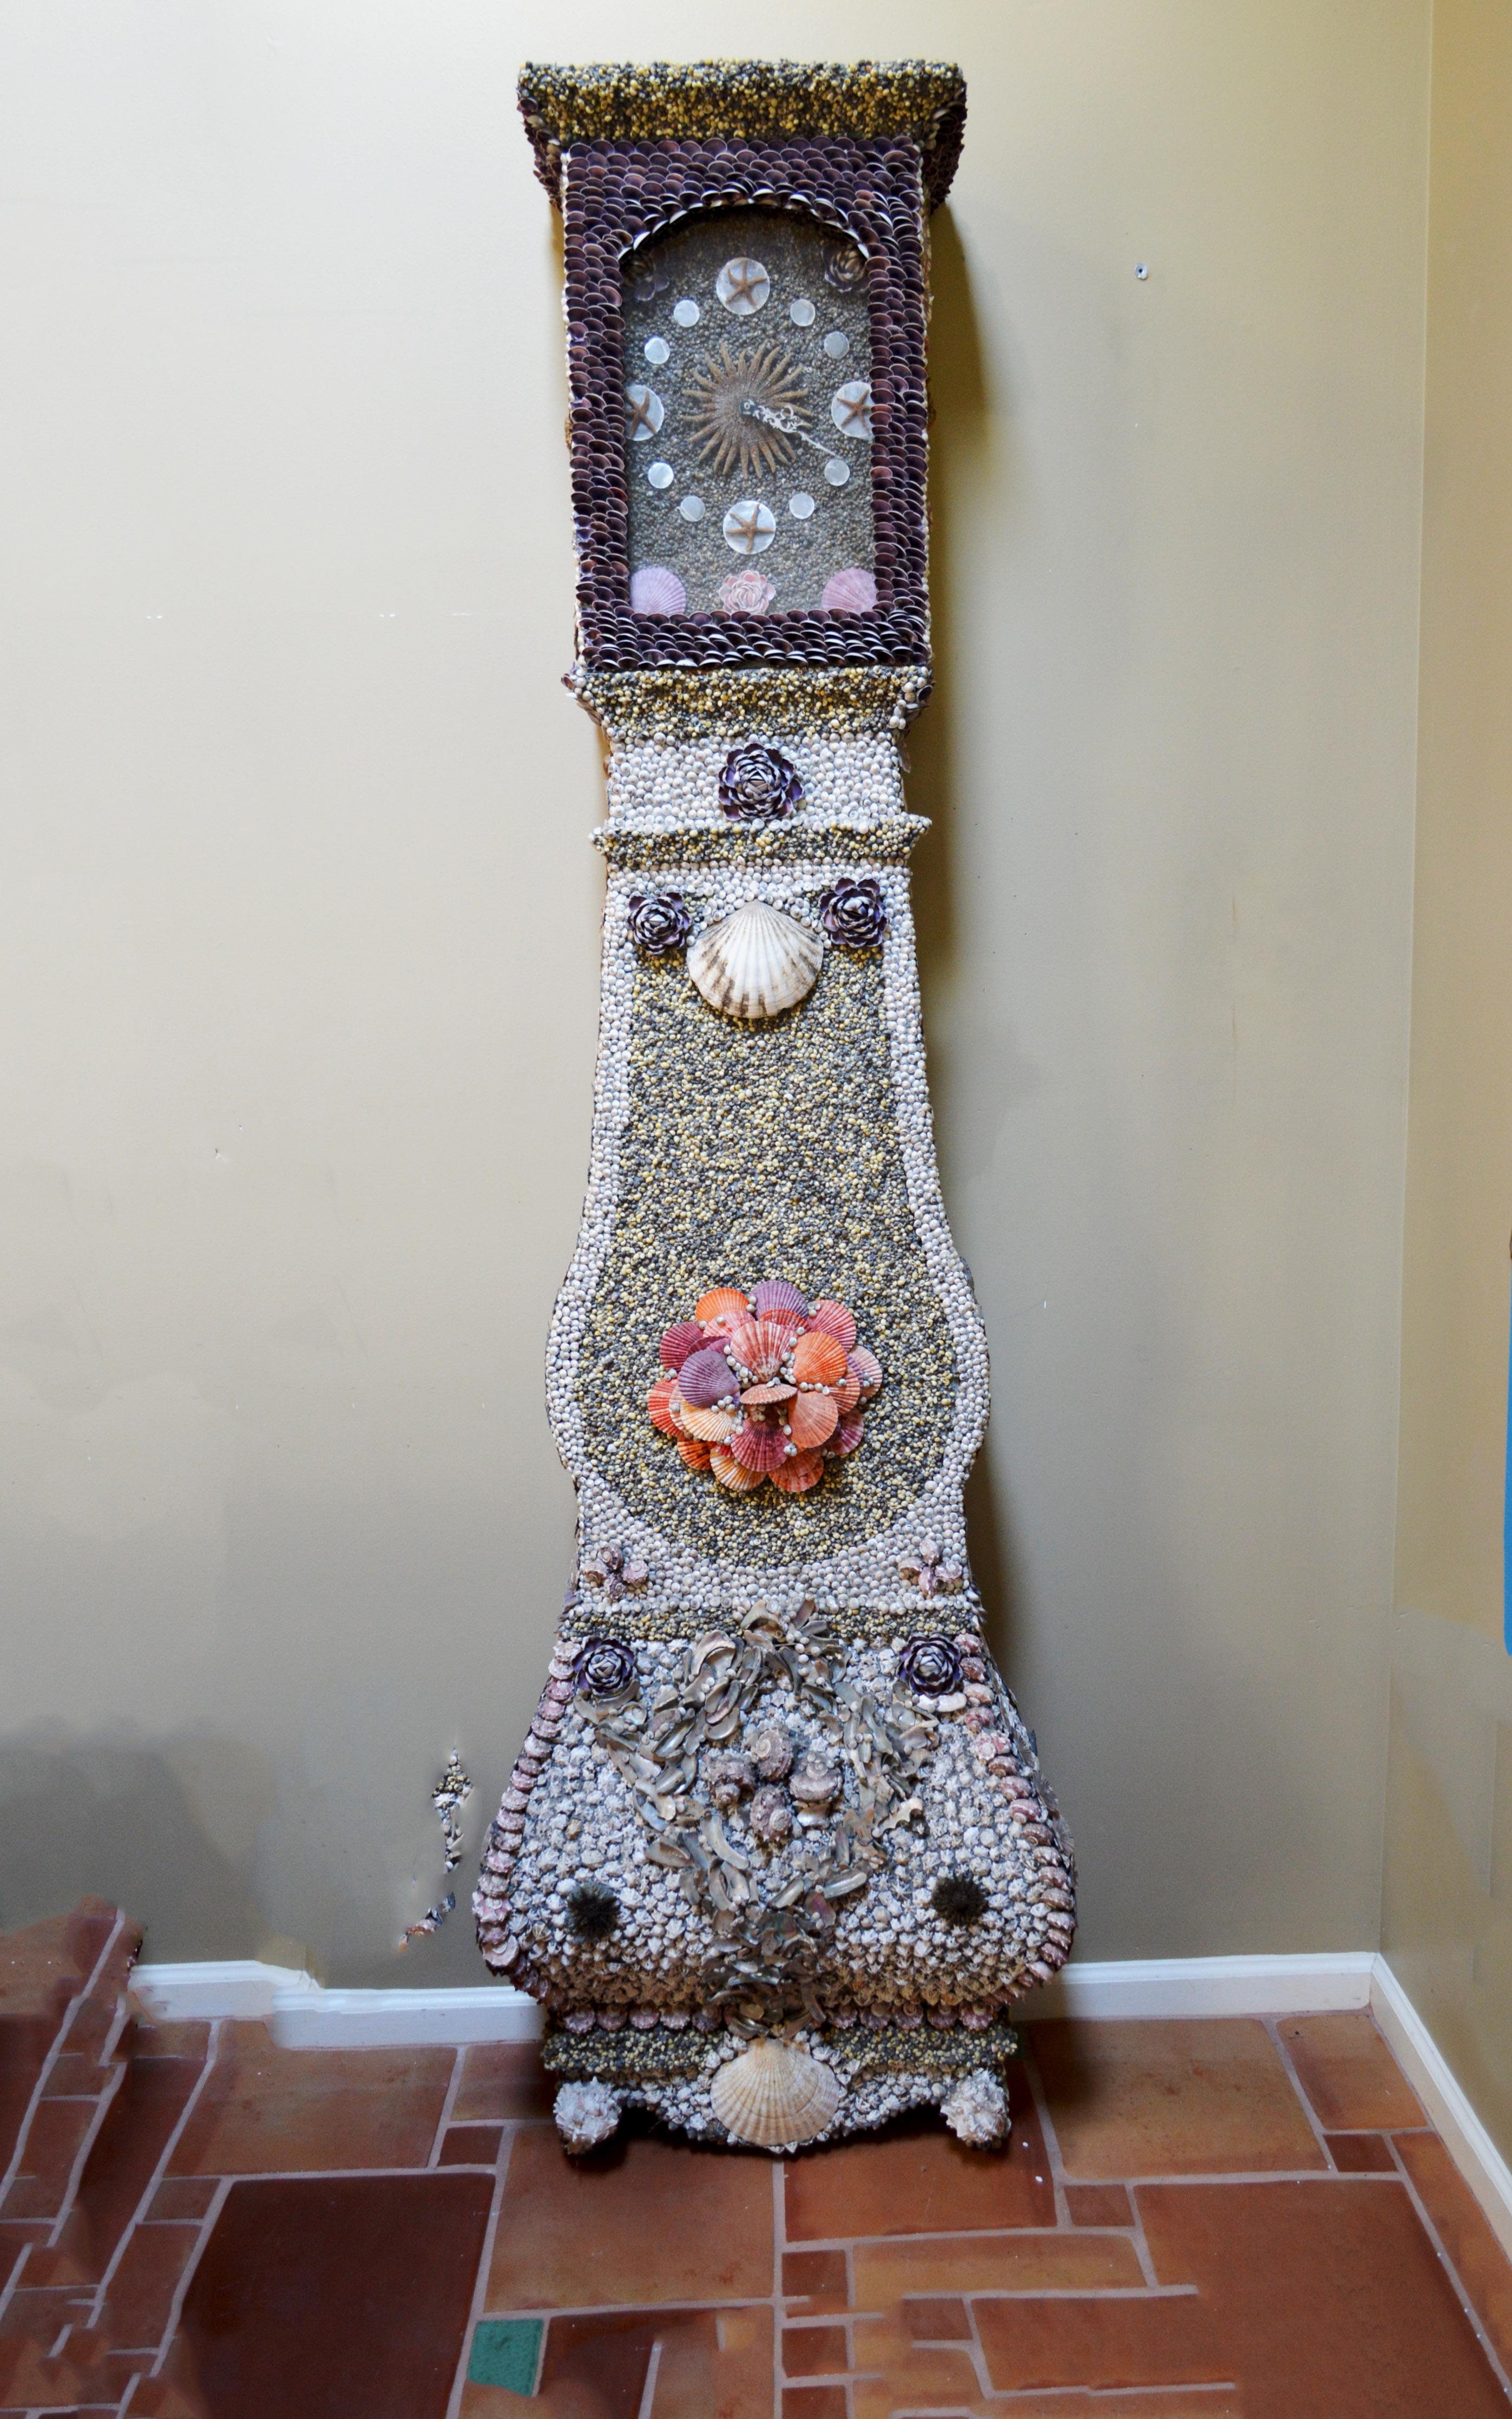 Folk art Sailor-made vintage seashell long case clock
Early 2nd half of 20th century

The shell-decorated clock consists of two pieces the hood and the body of the clock-both with a wood base. The body was decorated with a selection of different